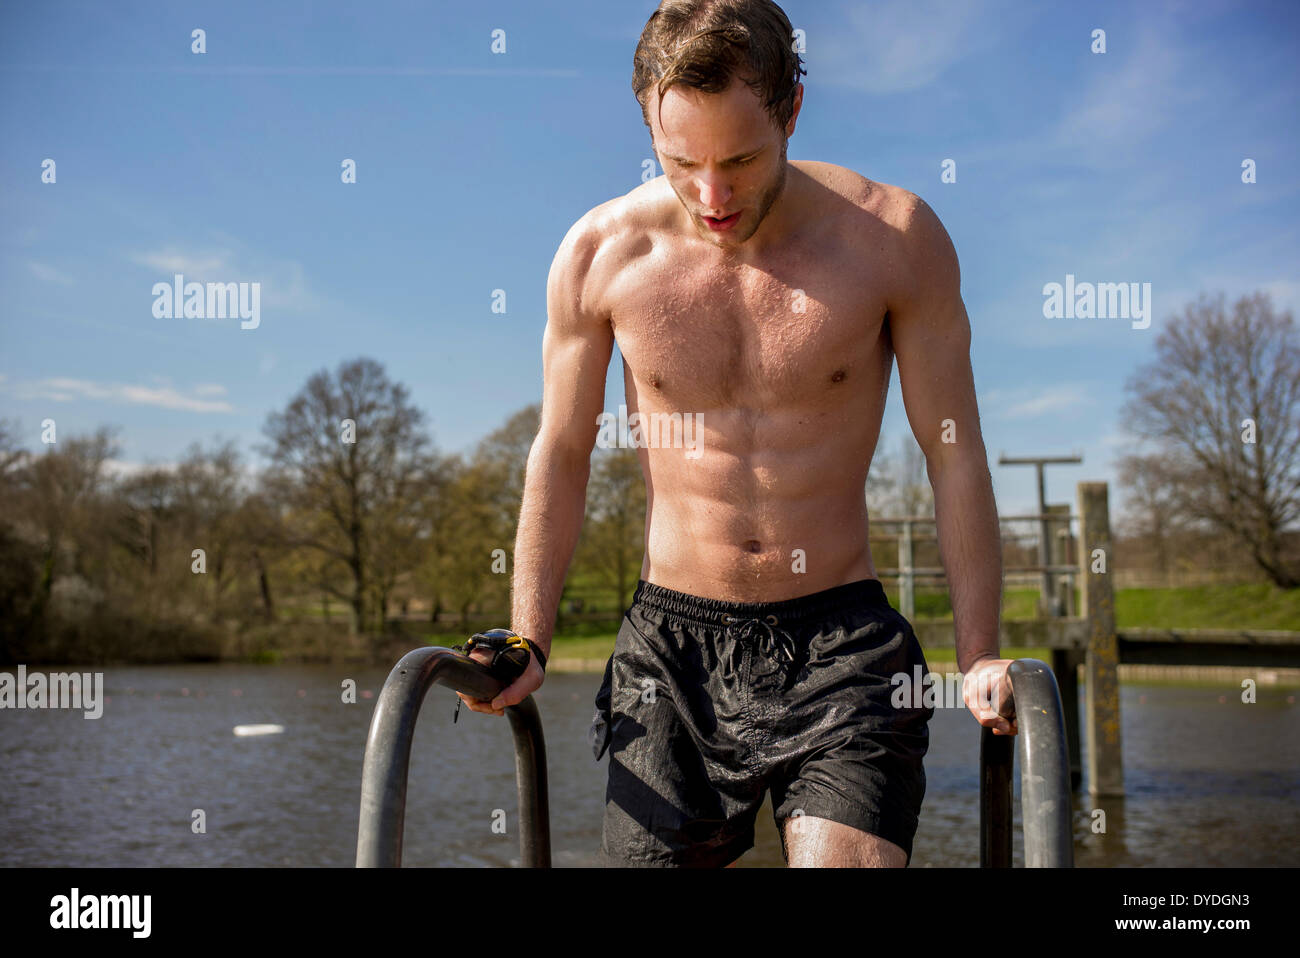 A young man in swimming trunks next to spring fresh water ponds. Stock Photo